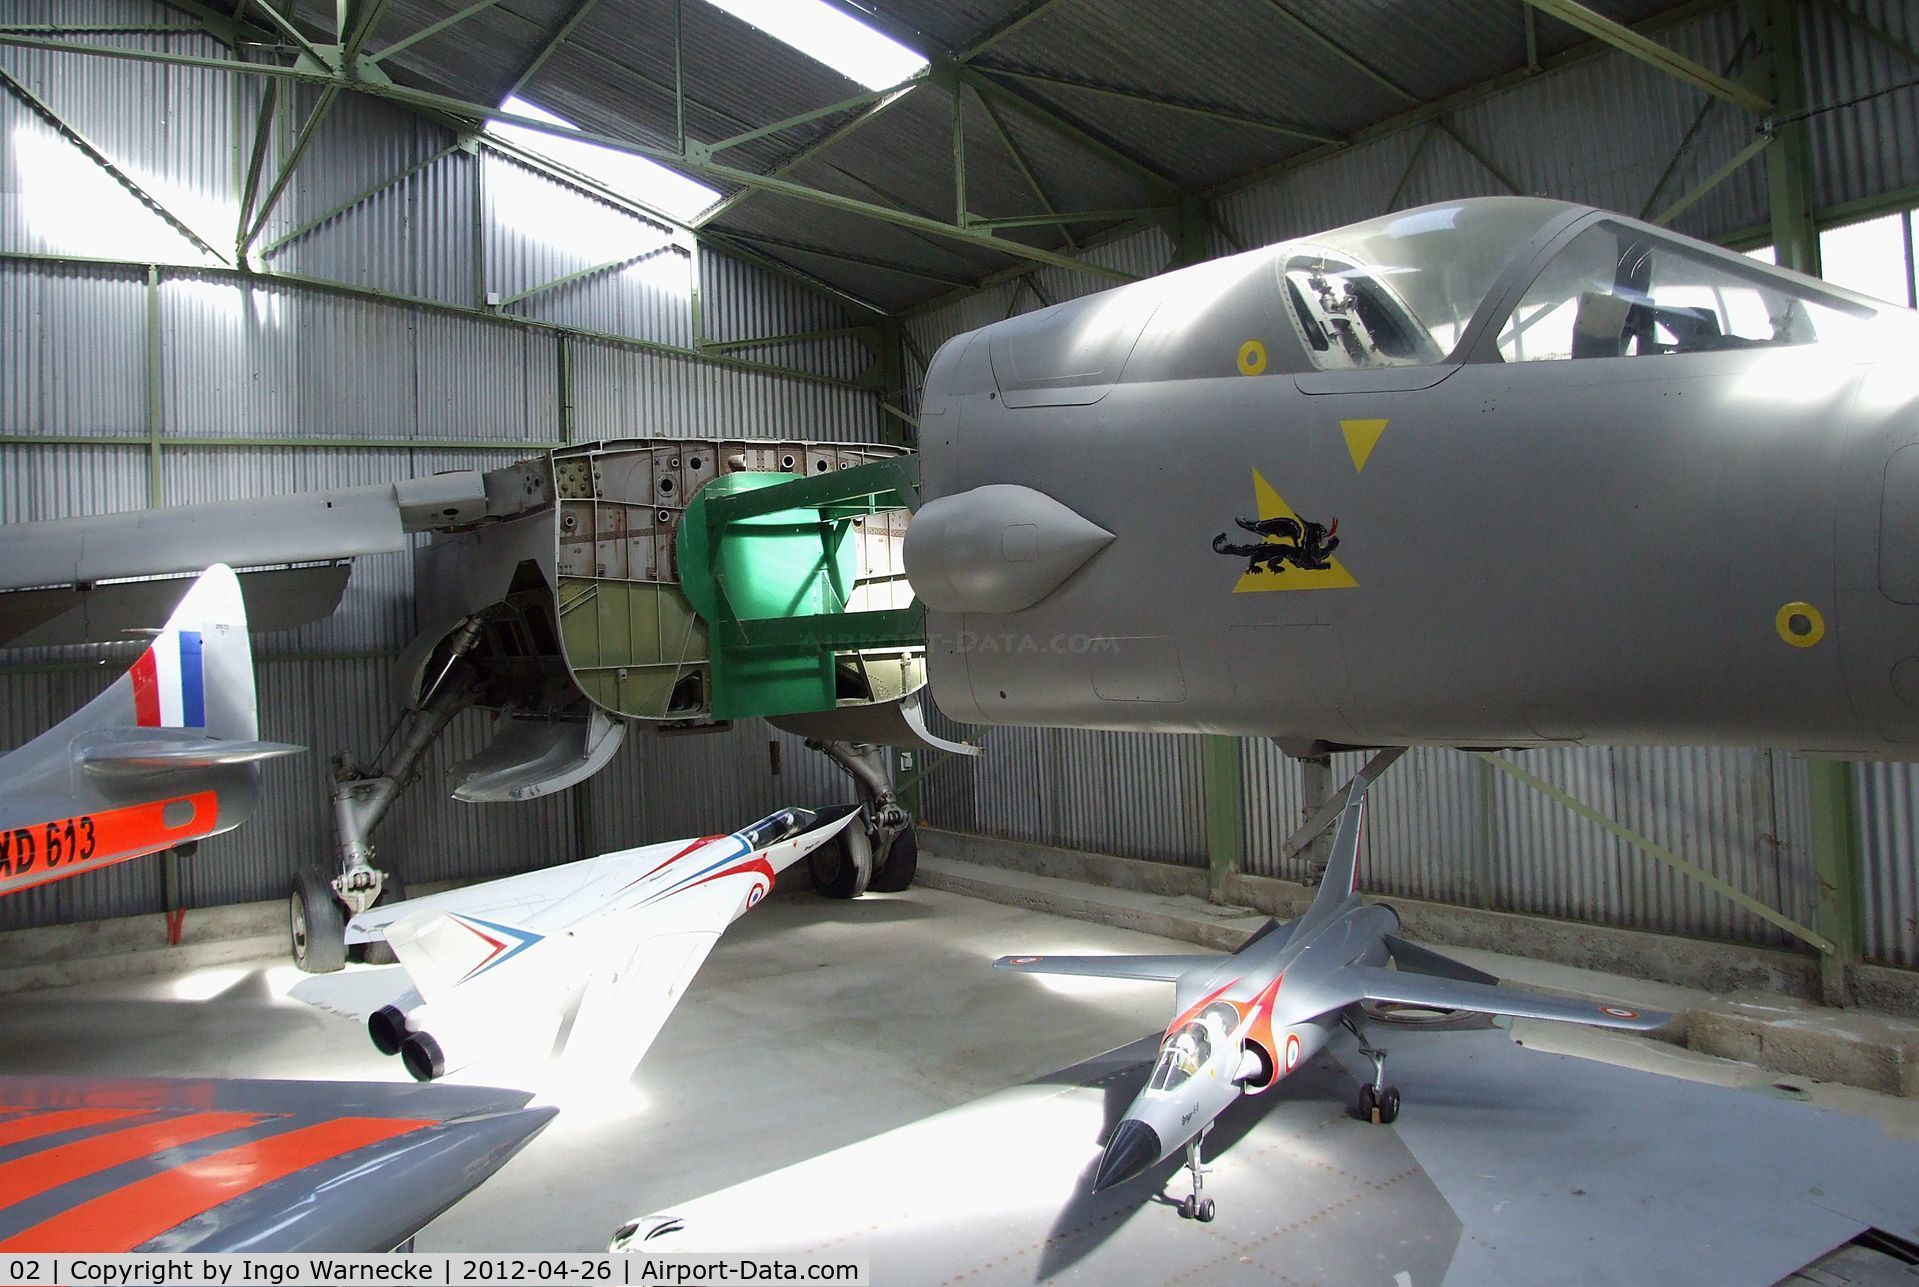 02, 1972 Dassault Mirage G8 C/N 02, Dassault Mirage G8-02 (only front and center fuselage and one wing) at the Musée Européen de l'Aviation de Chasse, Montelimar Ancone airfield